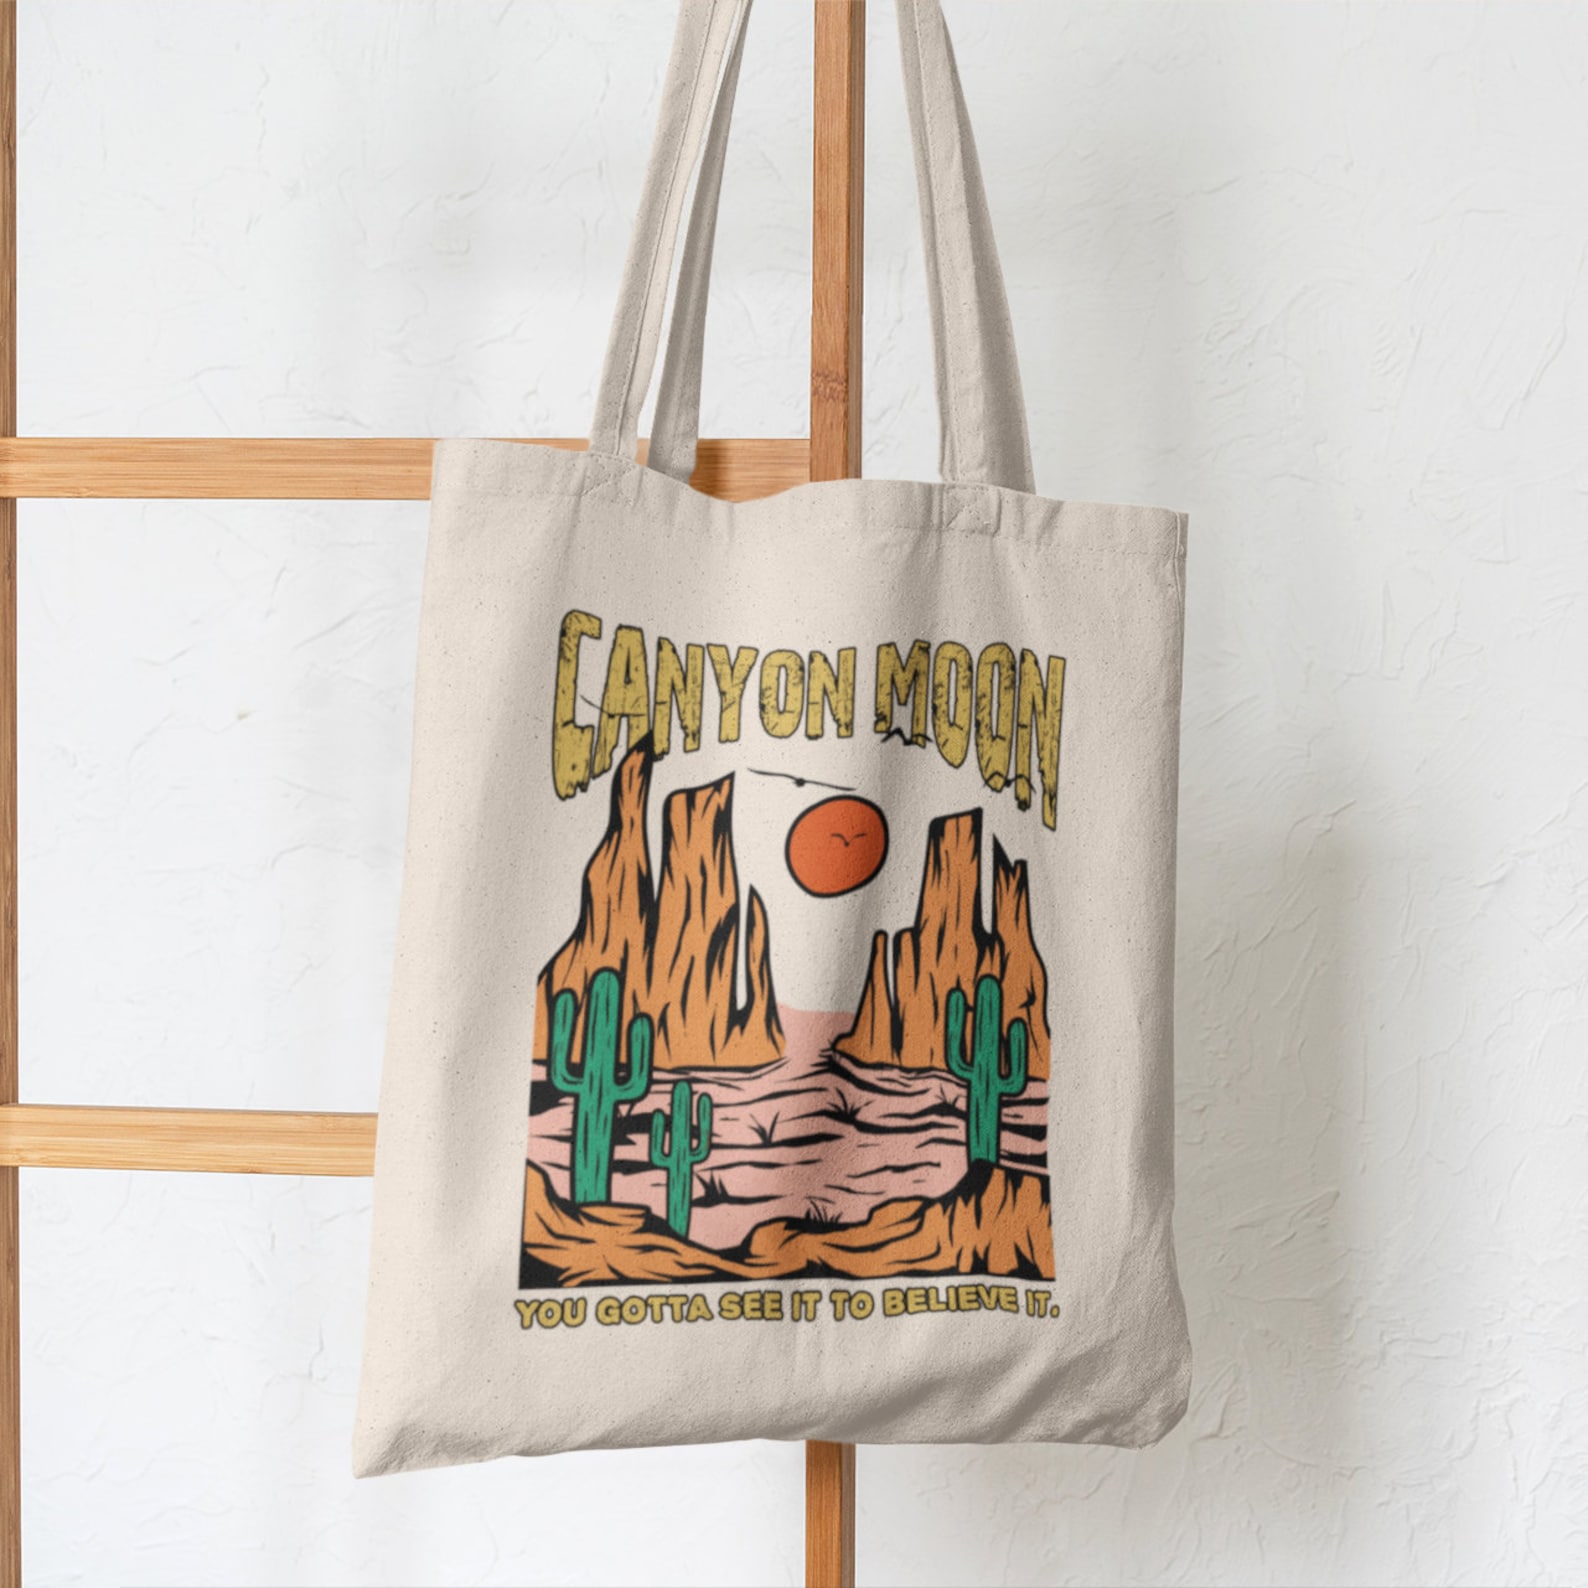 Canyon Moon Tote Bag Outdoors Styles Shoulder Bag Cotton - Etsy